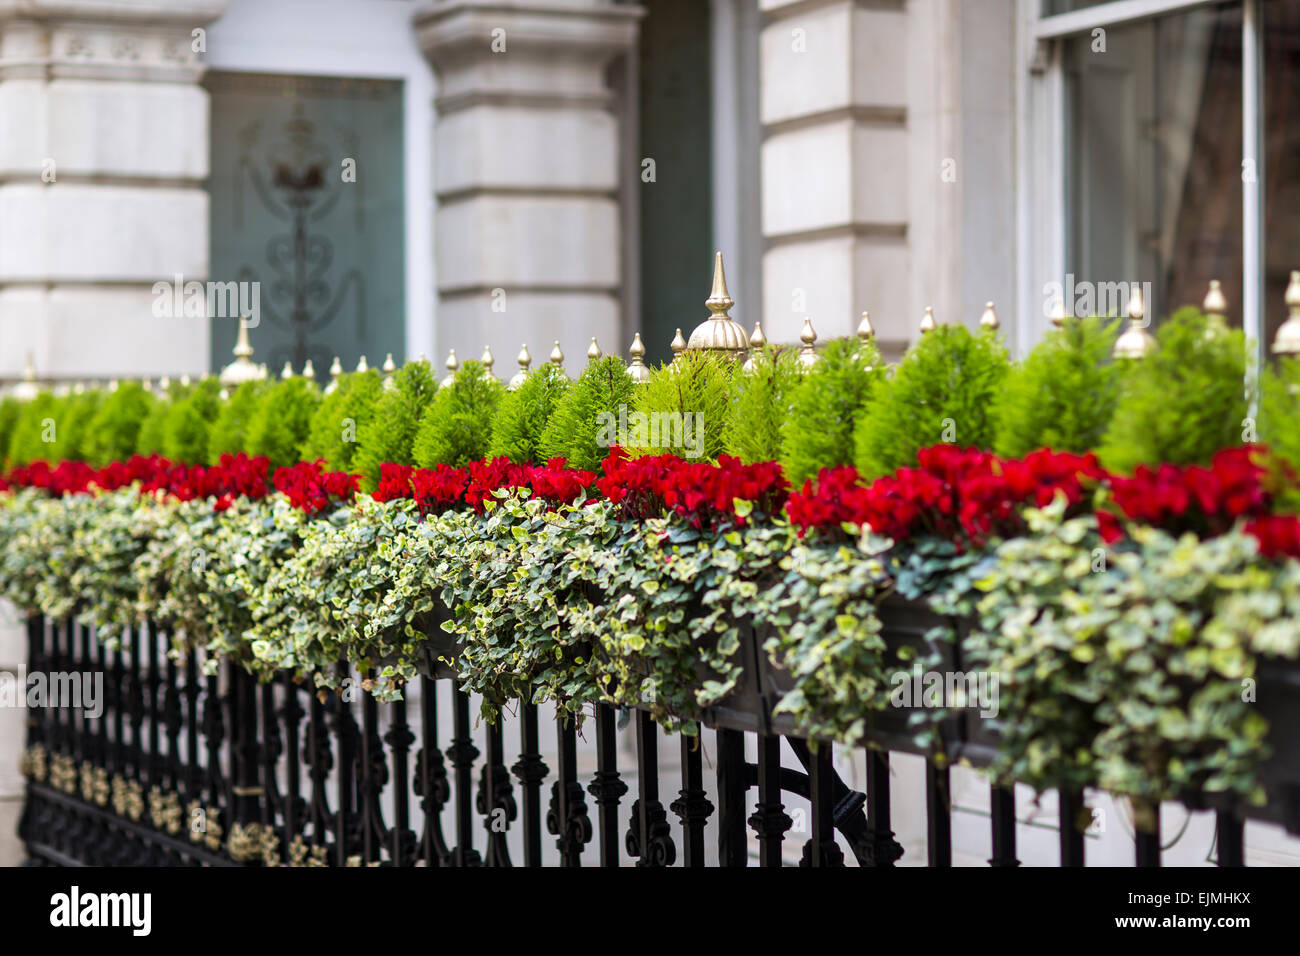 Wrought iron railing with shrubs and flowers, London Stock Photo